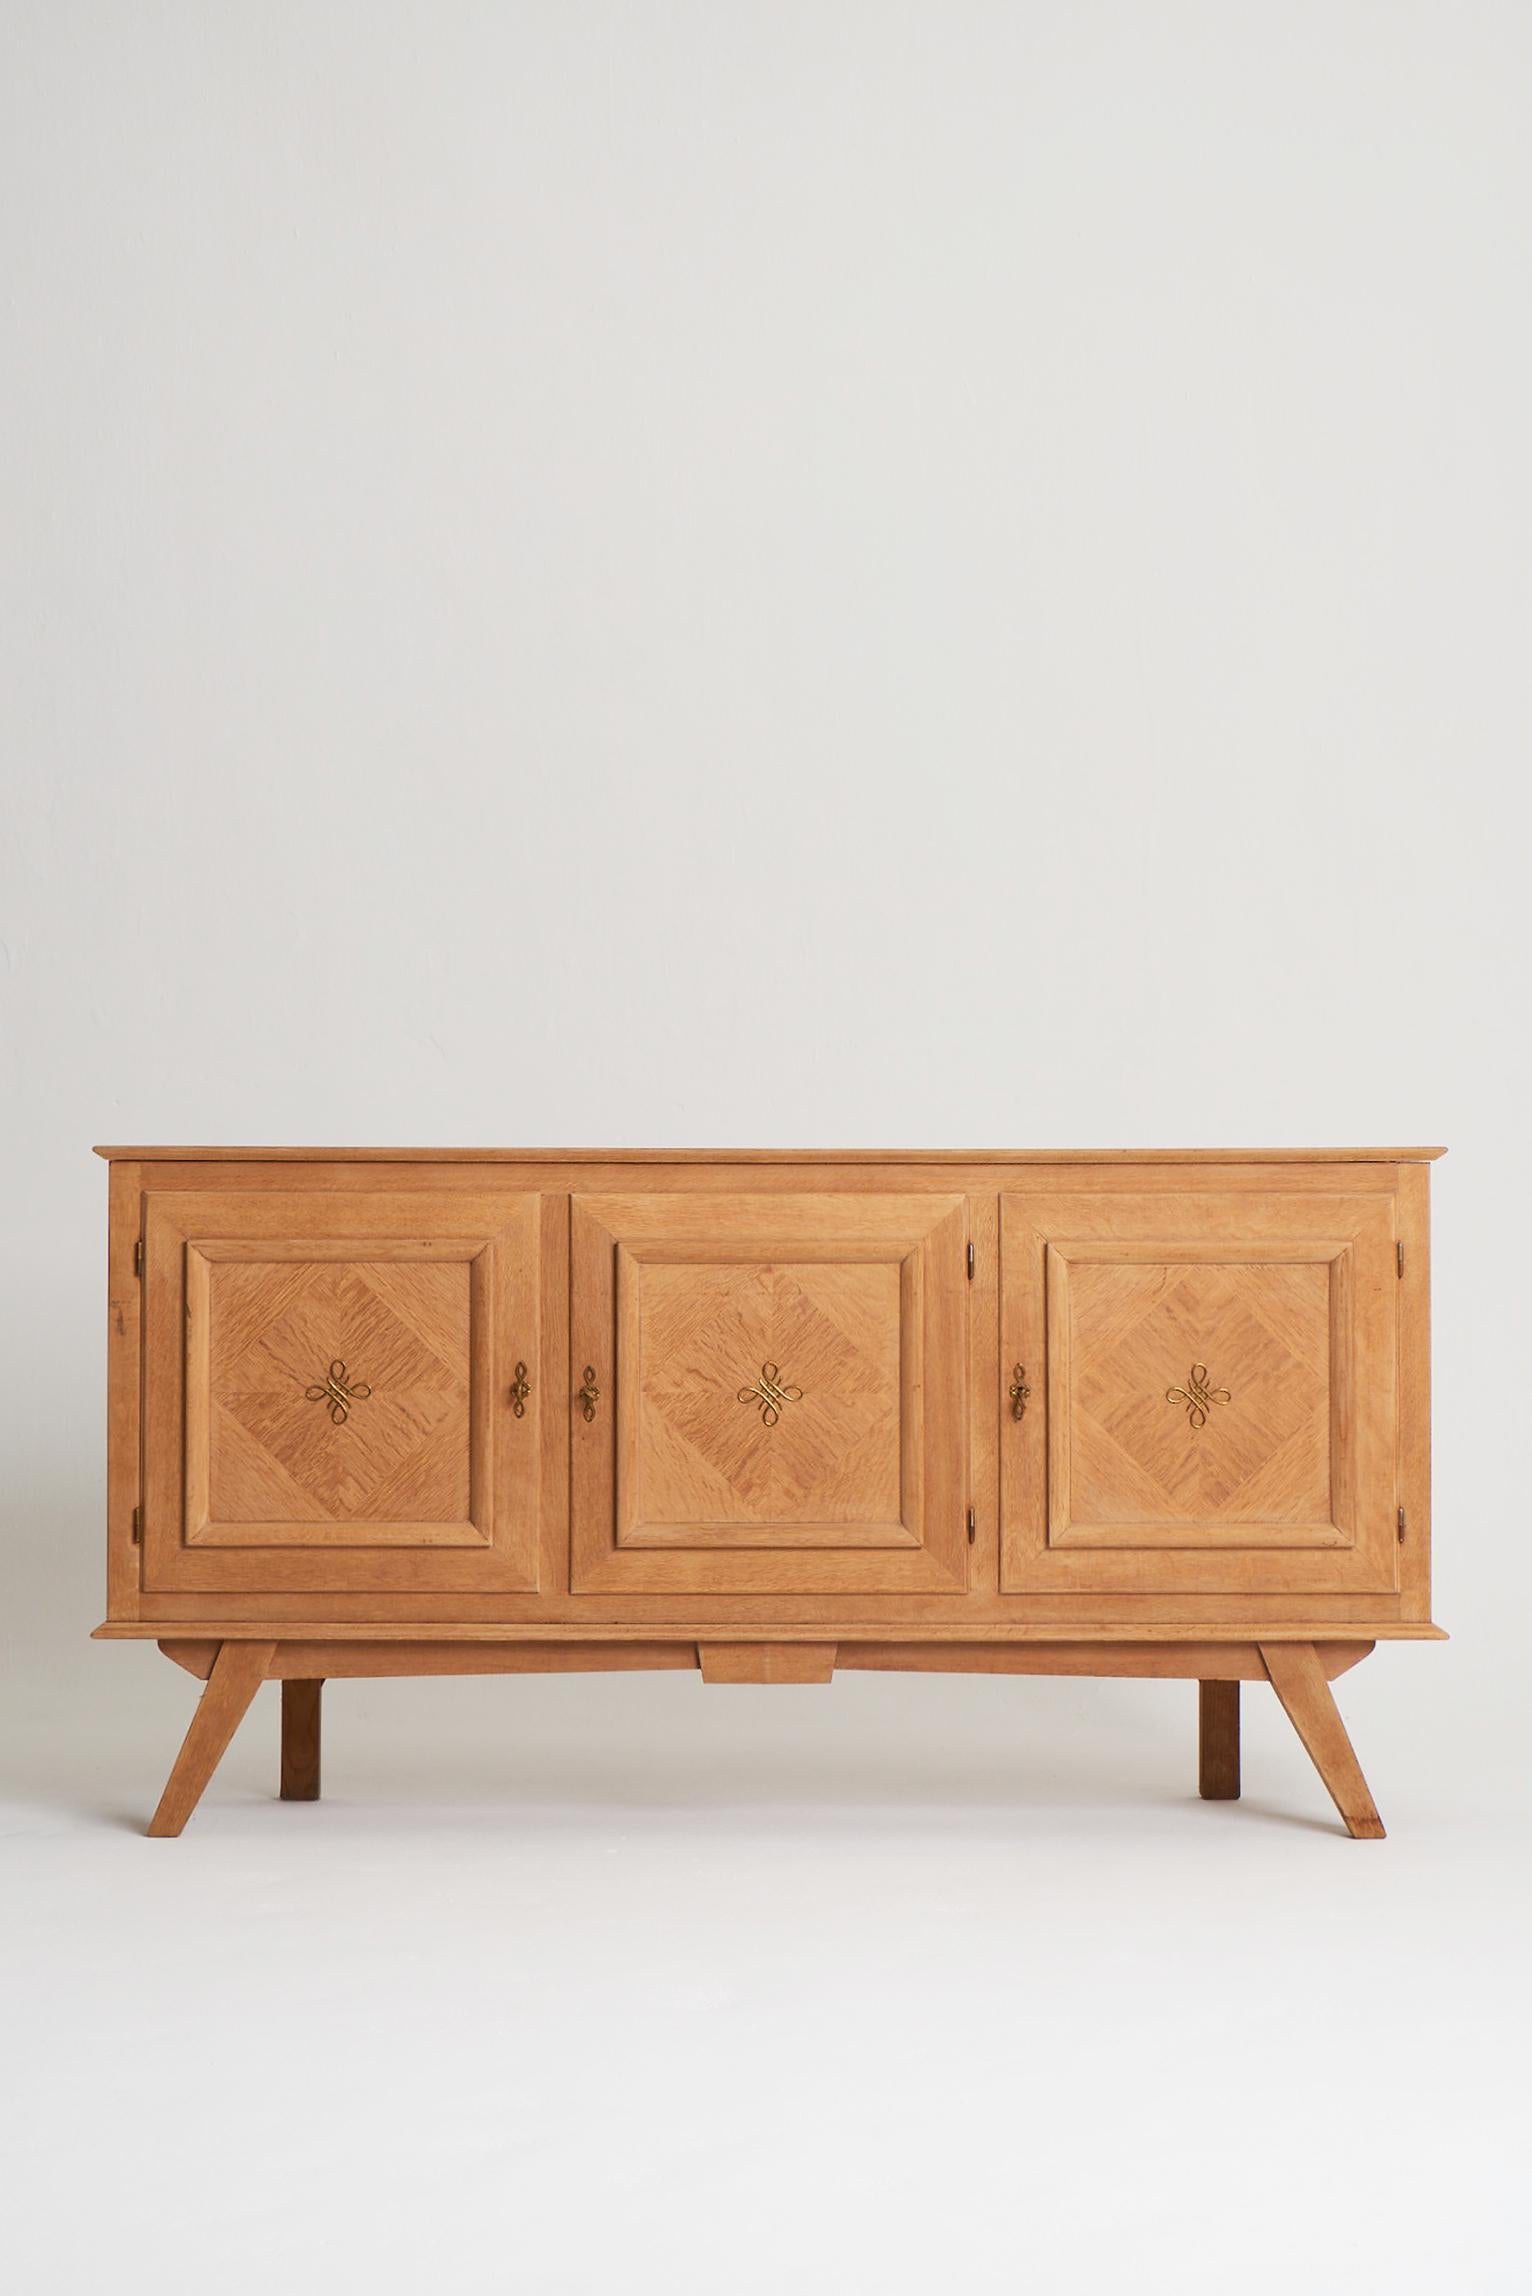 An Oak parquetry three-door sideboard, with brass accents.
France, Circa 1940.